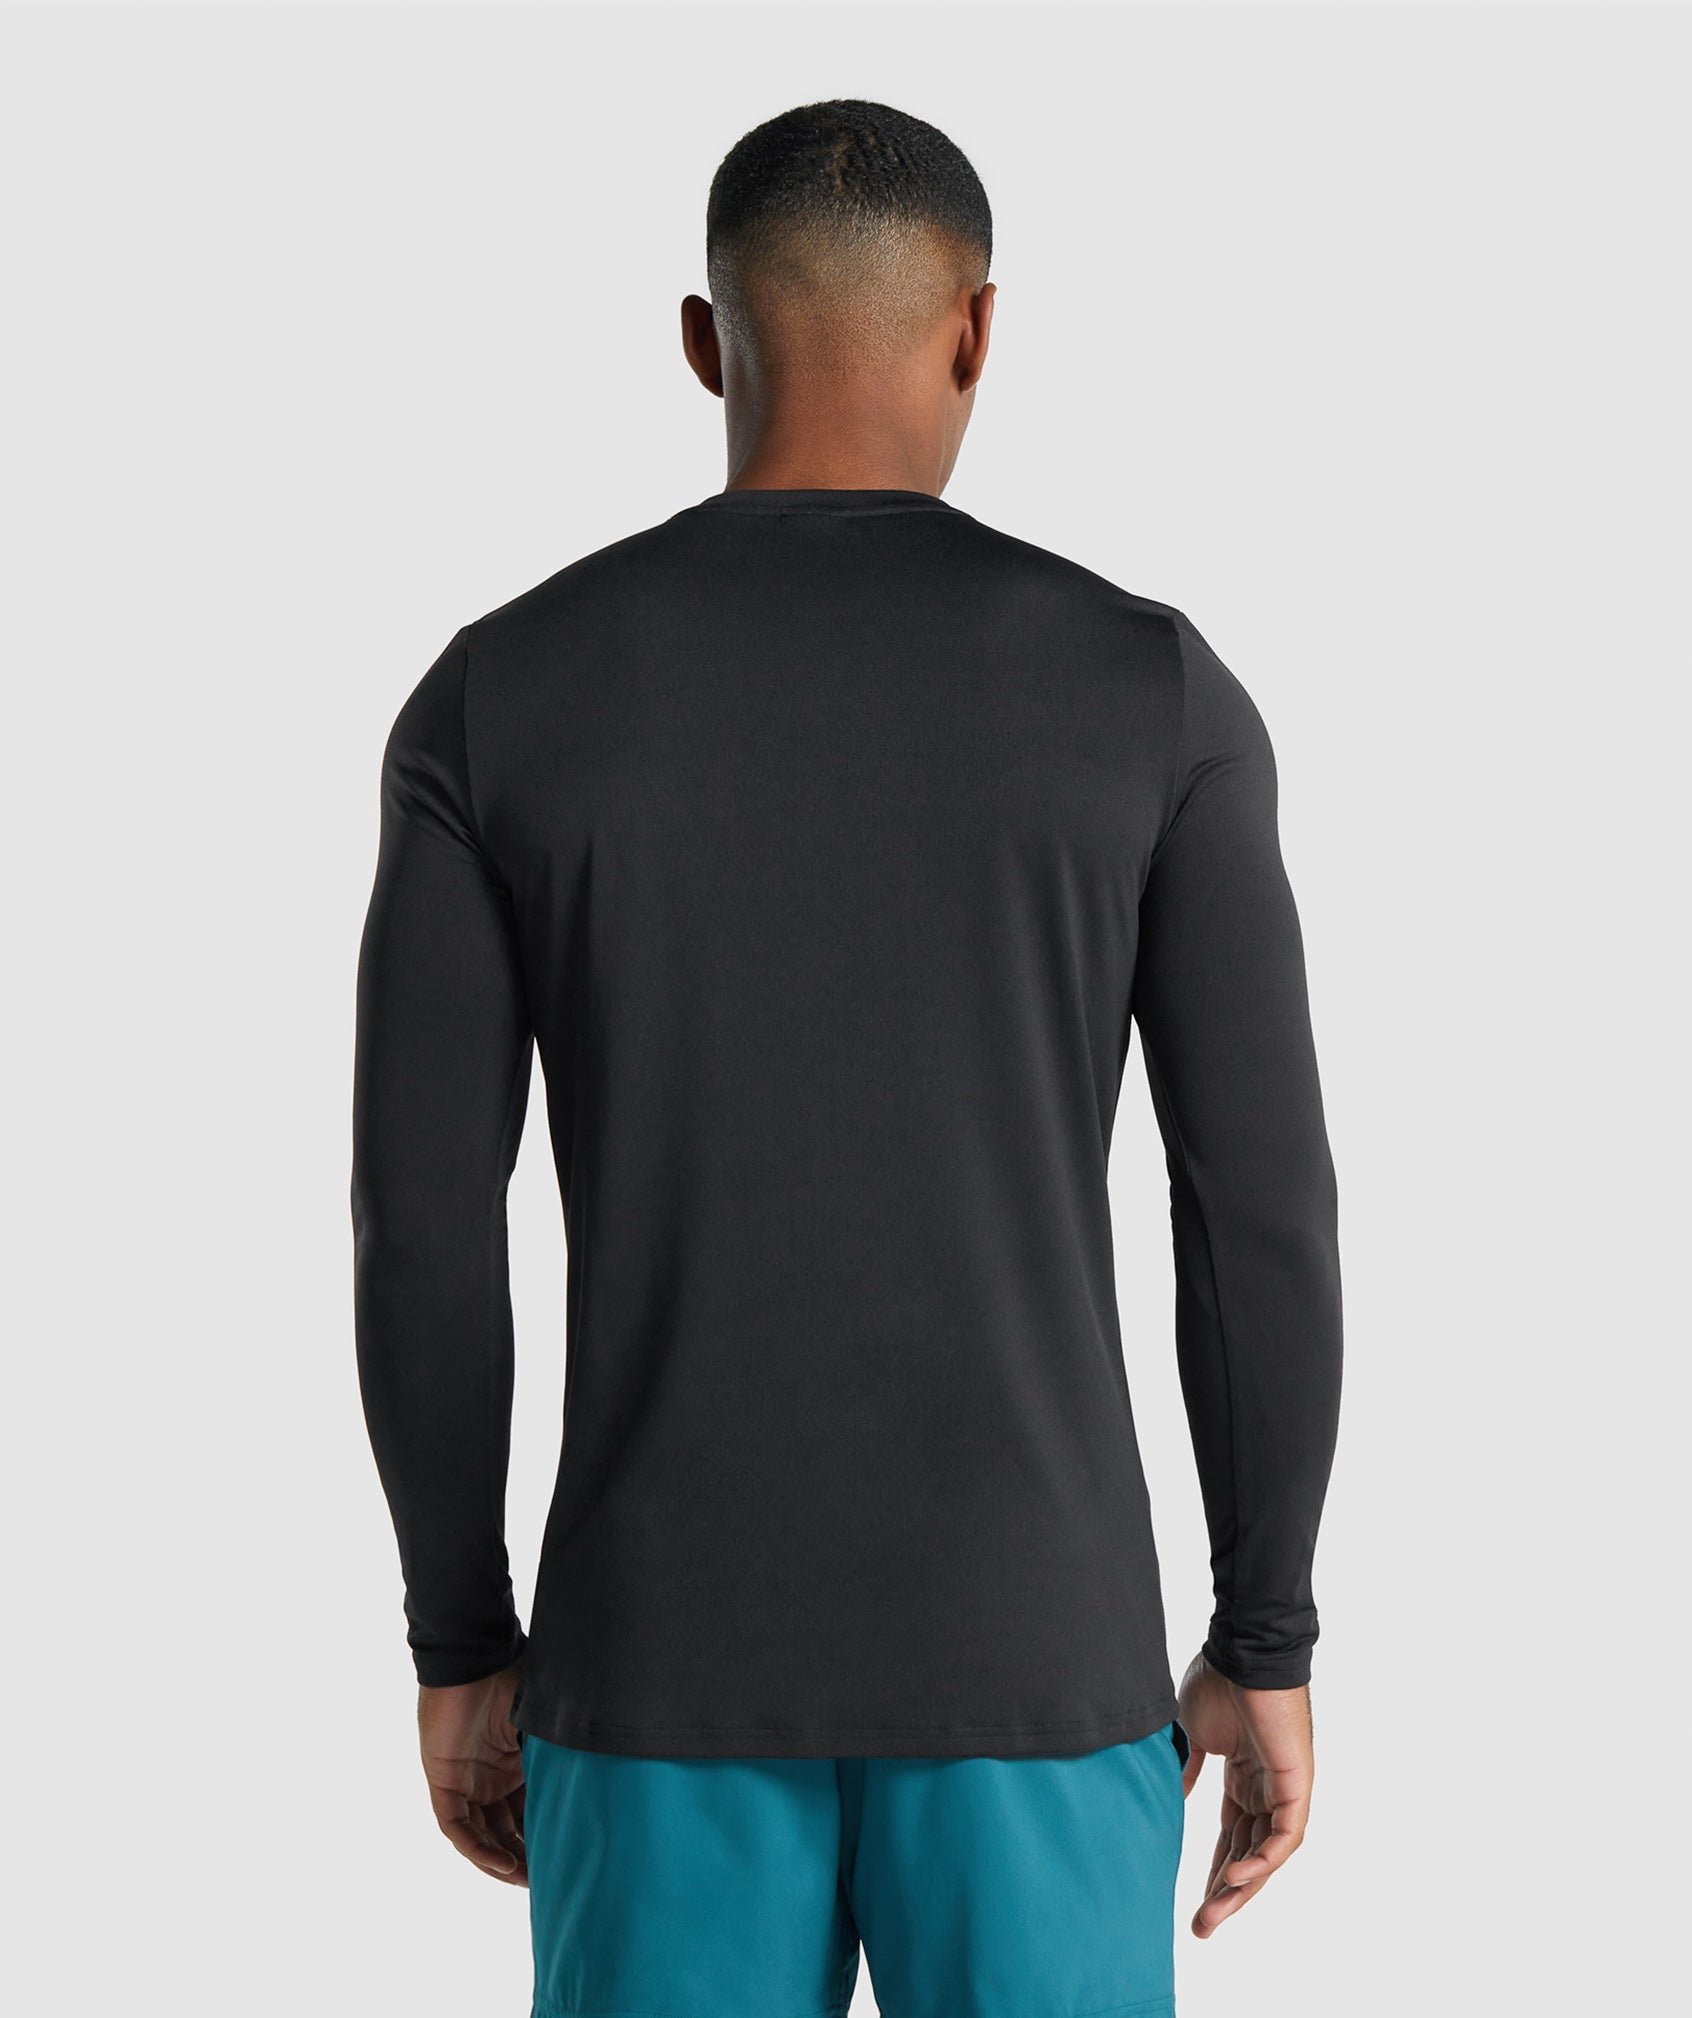 Arrival Long Sleeve Graphic T-Shirt in Black - view 2